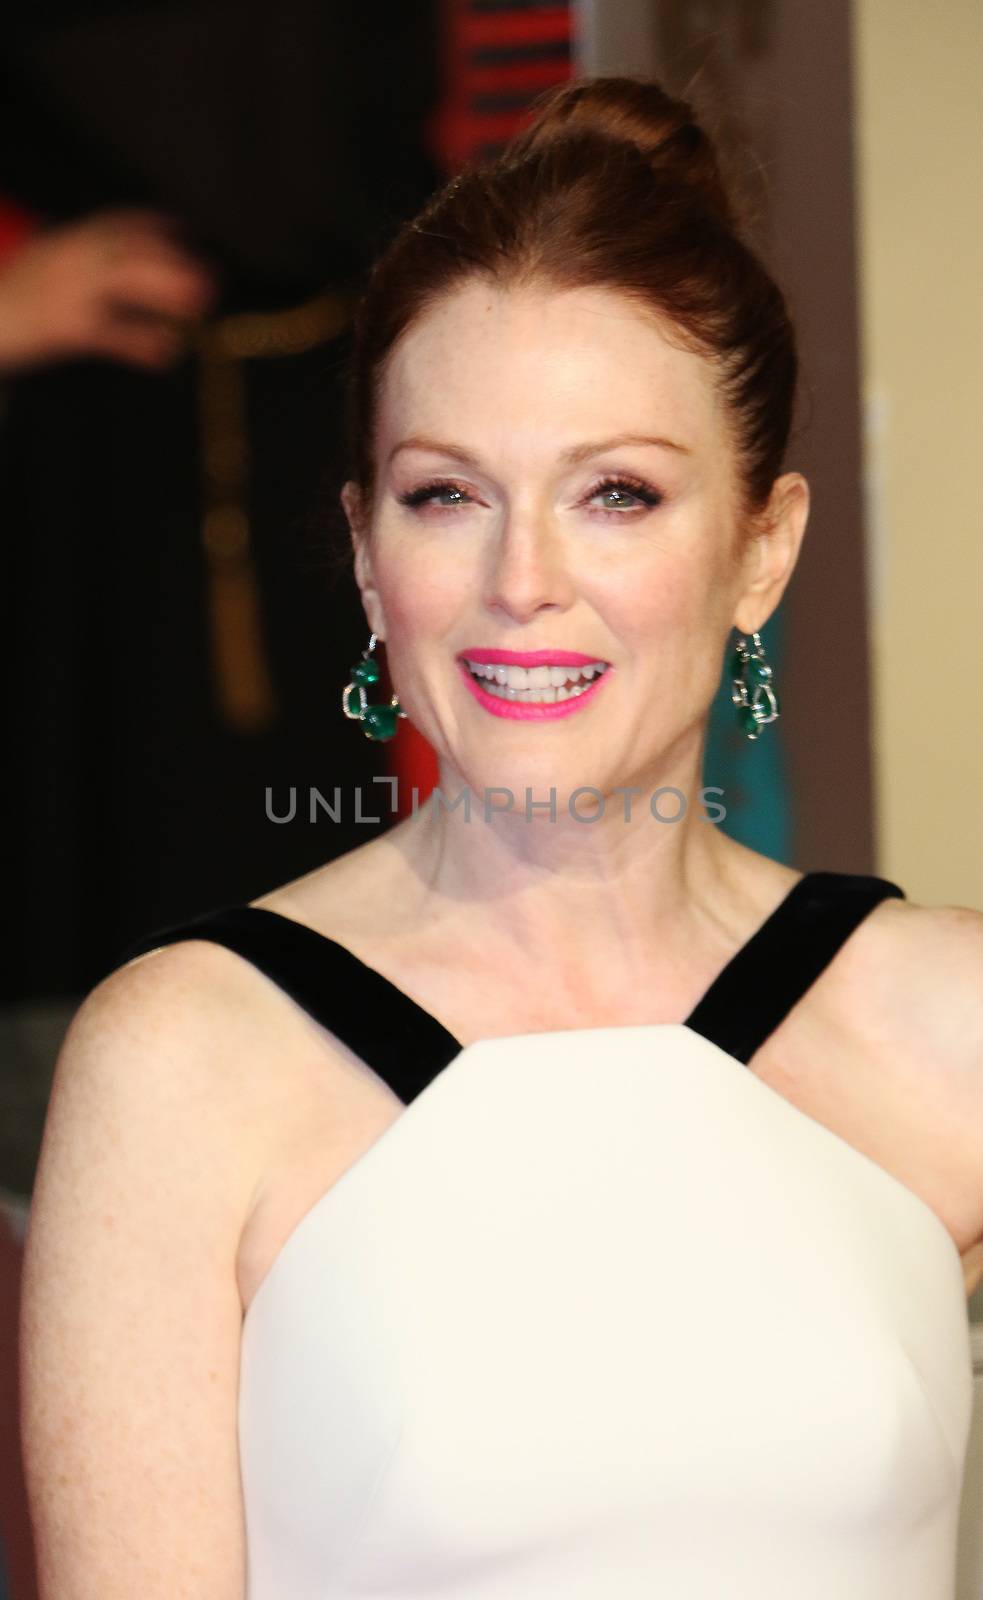 UK, London: American-British actress Julianne Moore poses on the red Carpet at the EE British Academy Film Awards, BAFTA Awards, at the Royal Opera House in London, England, on 14 February 2016.